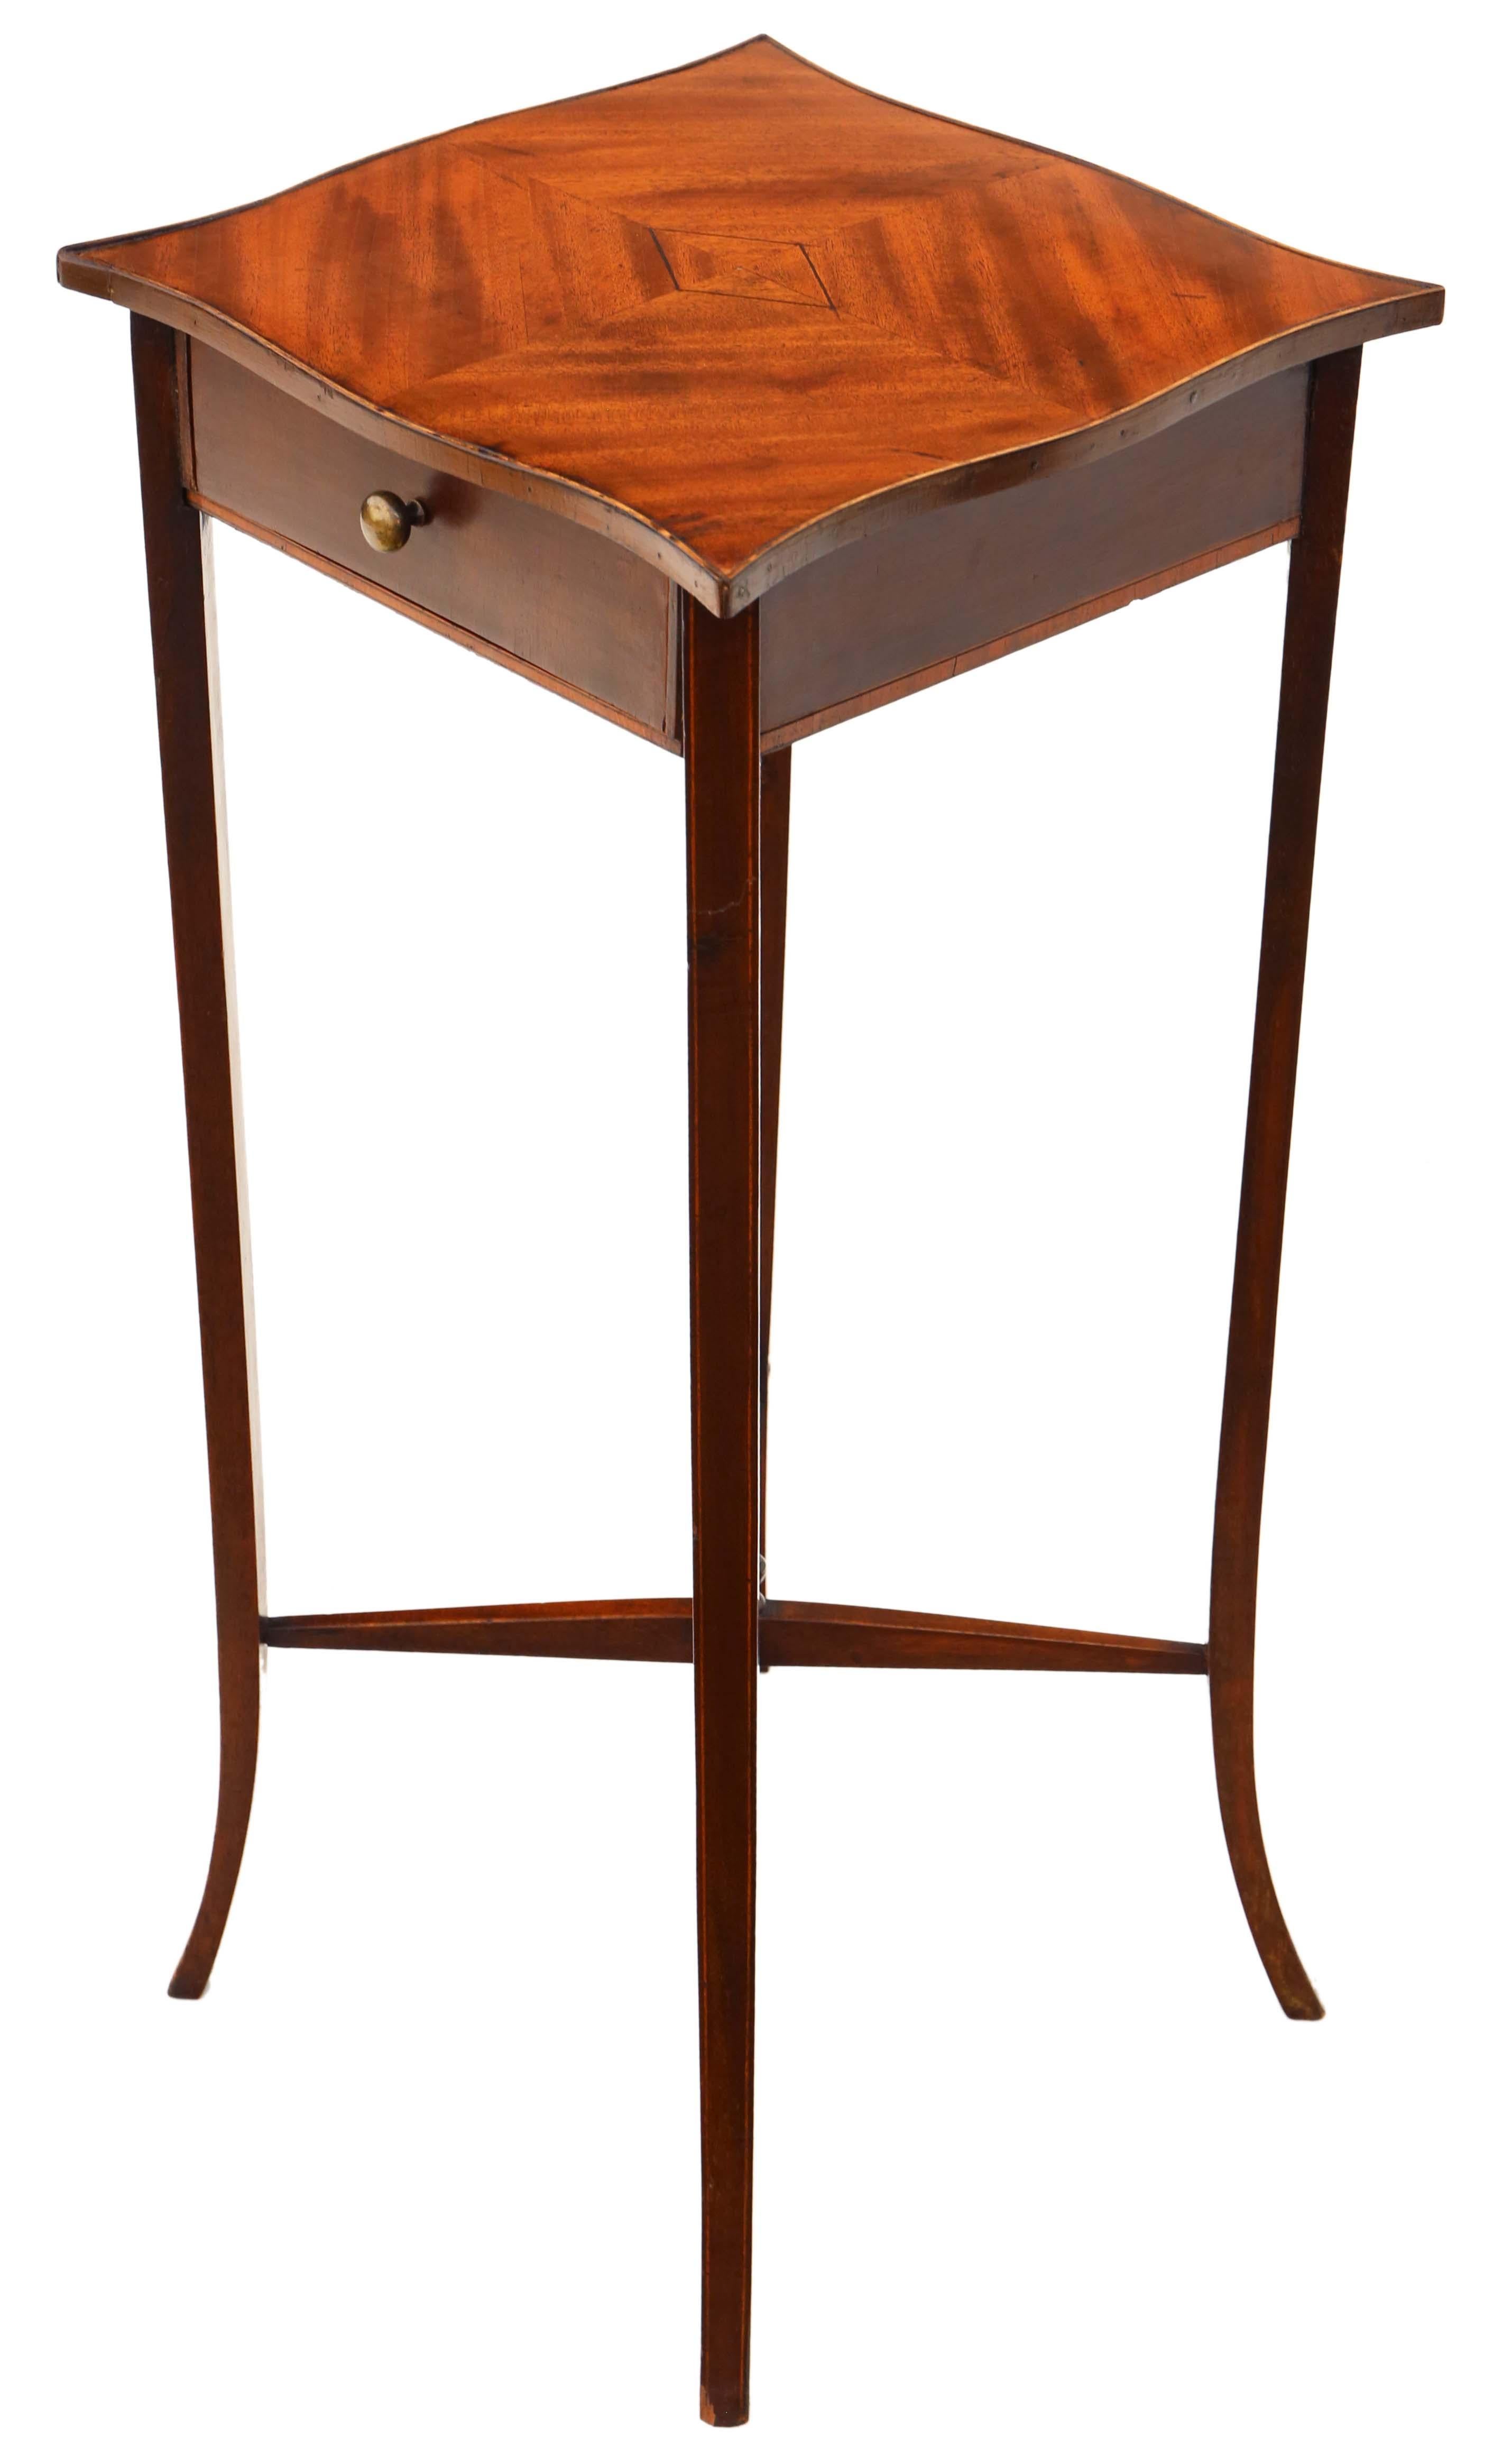 Antique quality Georgian revival serpentine mahogany bedside table cupboard C1910.

A fantastic piece with quality and style. Mahogany lined drawer slides freely.

No loose joints or woodworm.

Would look great in the right location!

Overall